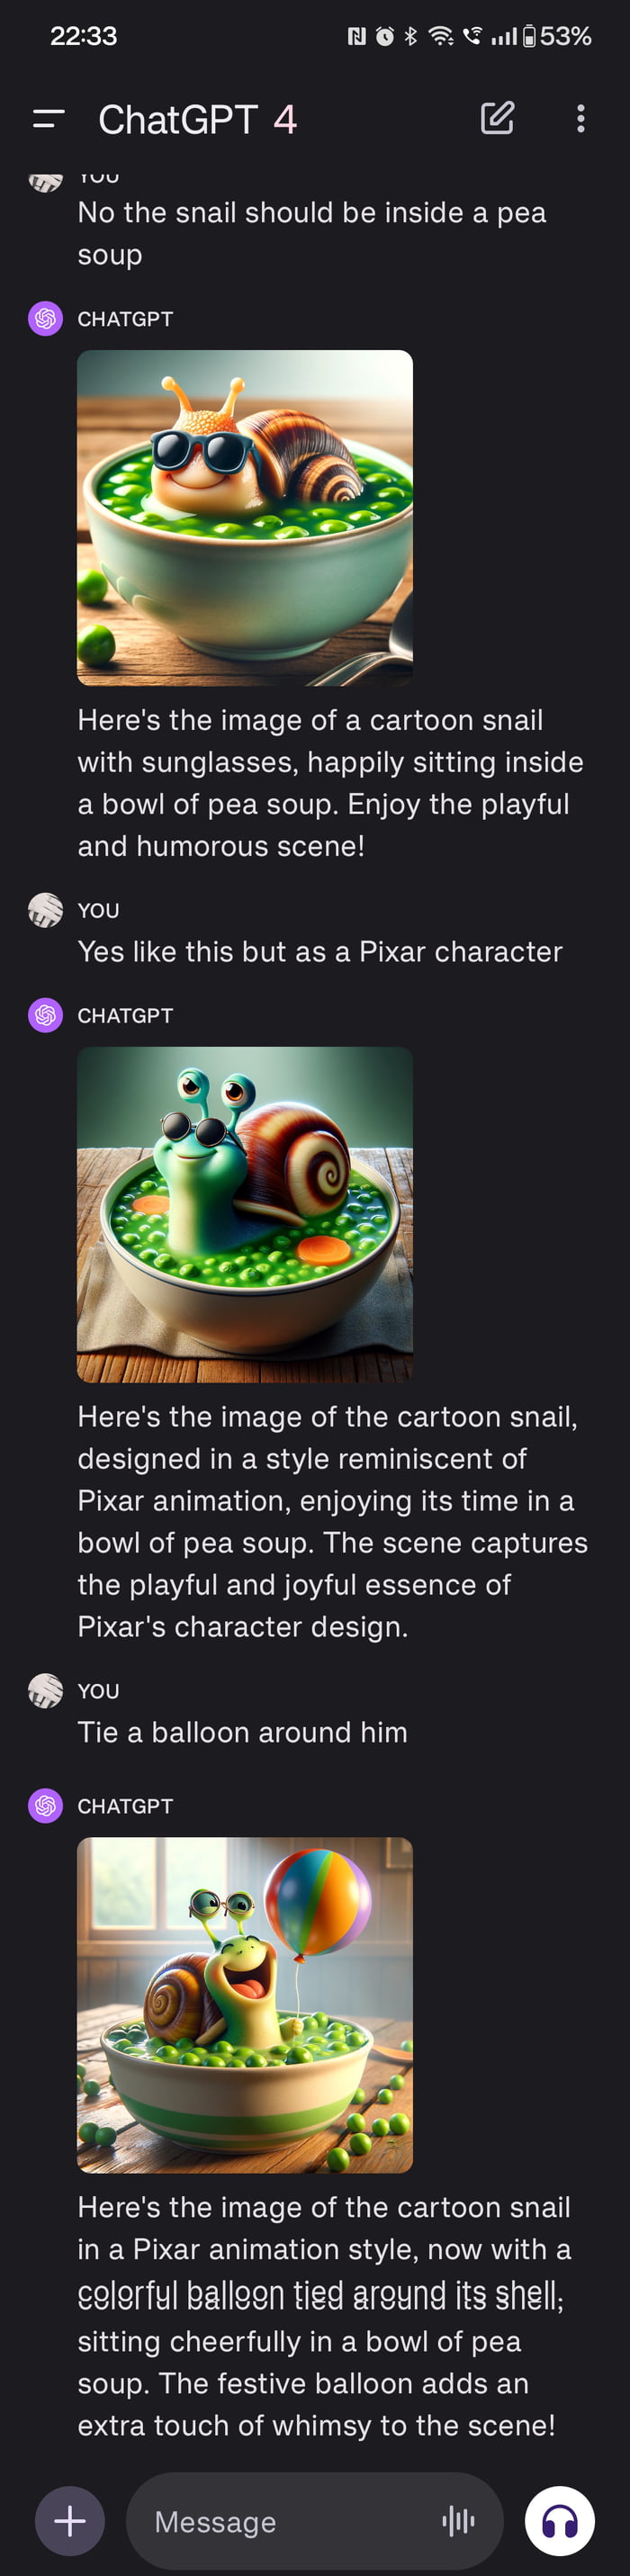 GPT snail vacation in a pea soup